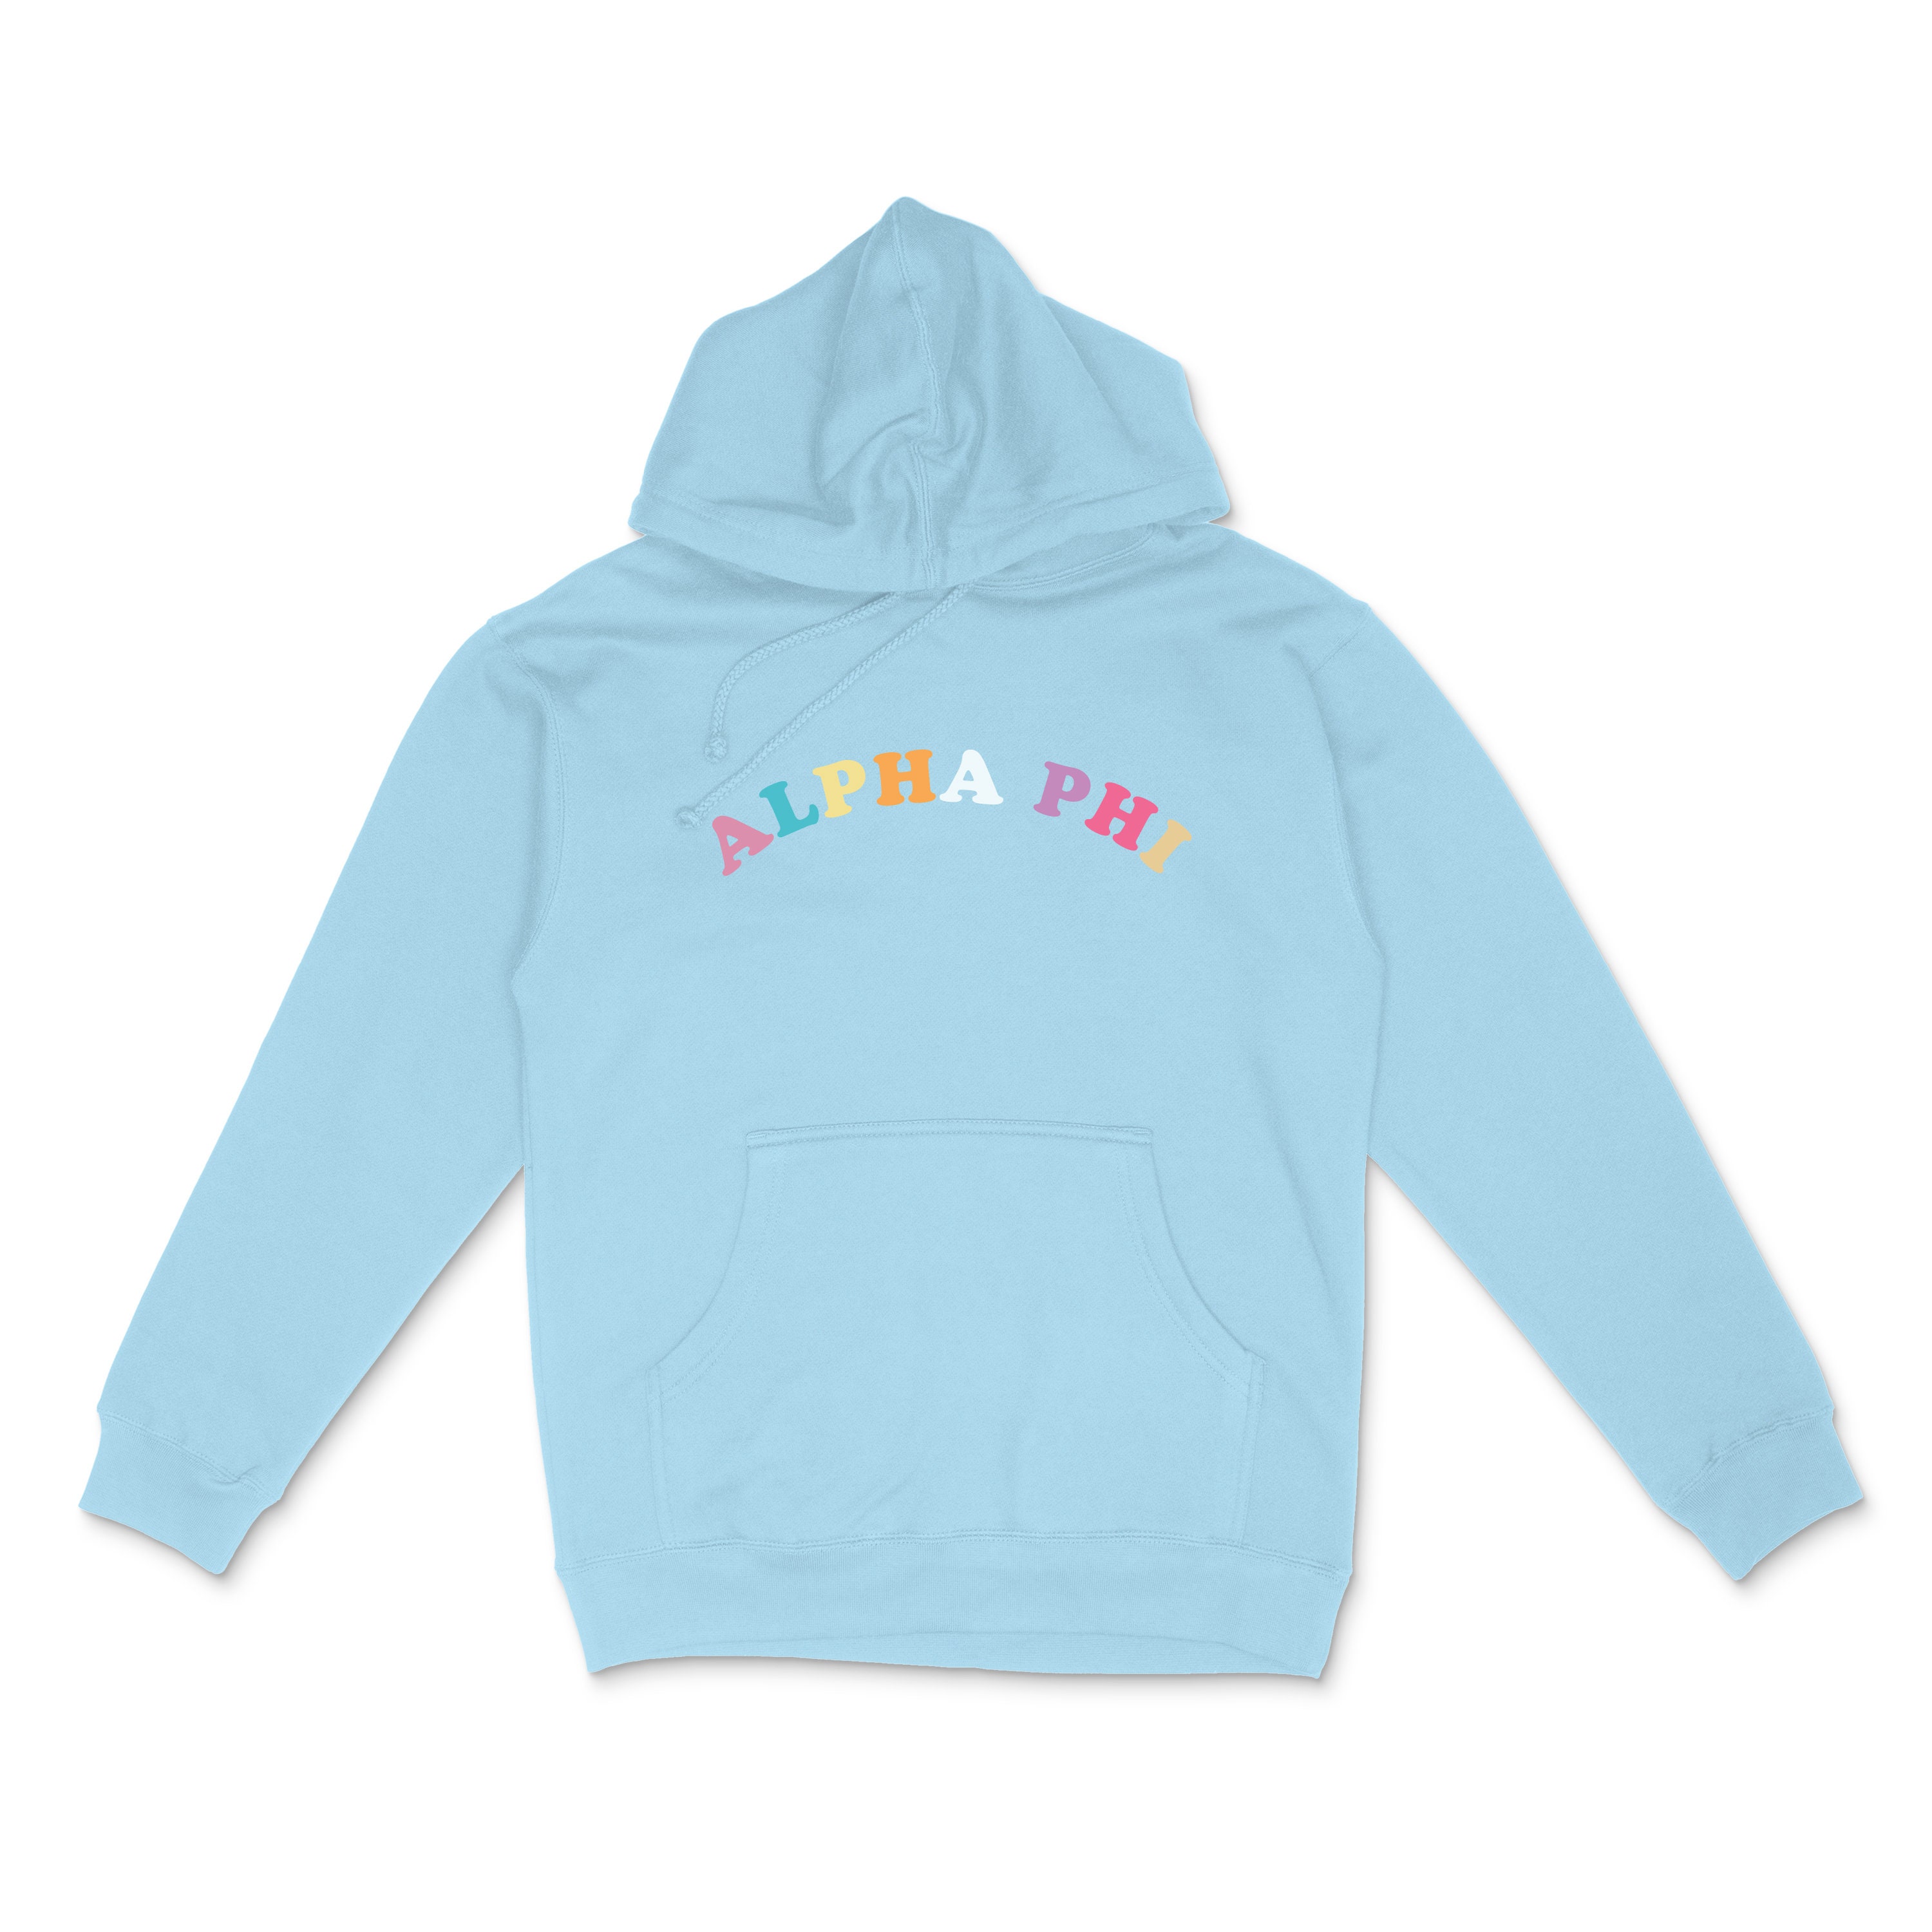 Cute Madhappy Etsy Text Colorful Hoodie Finland - Trendy Sorority Alpha Aphi Phi